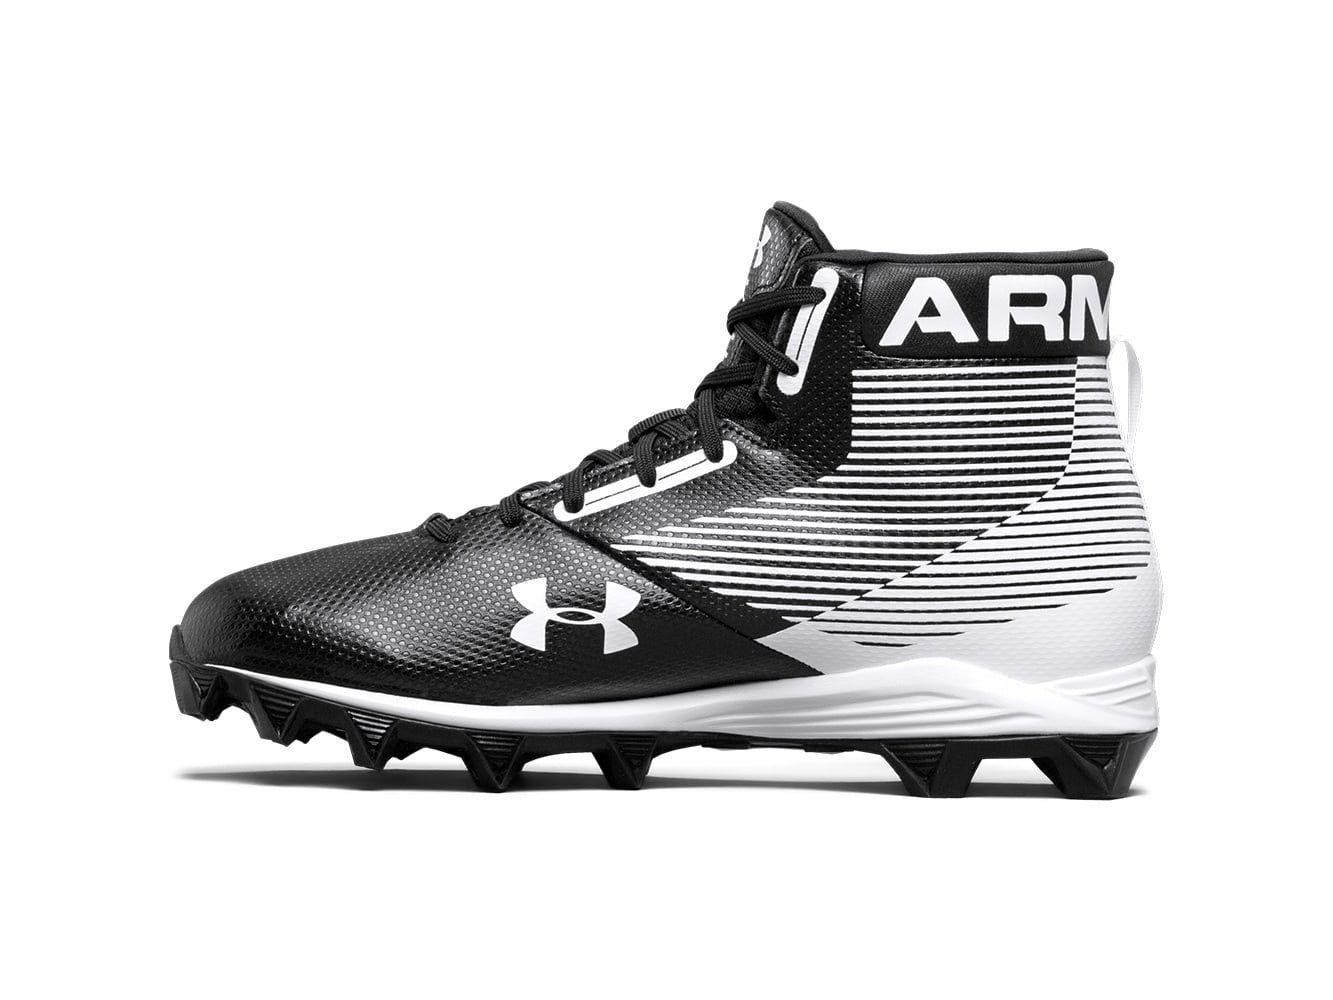 Under Armour Hammer Mid RM Black White Football Cleats Men’s Size 10.5